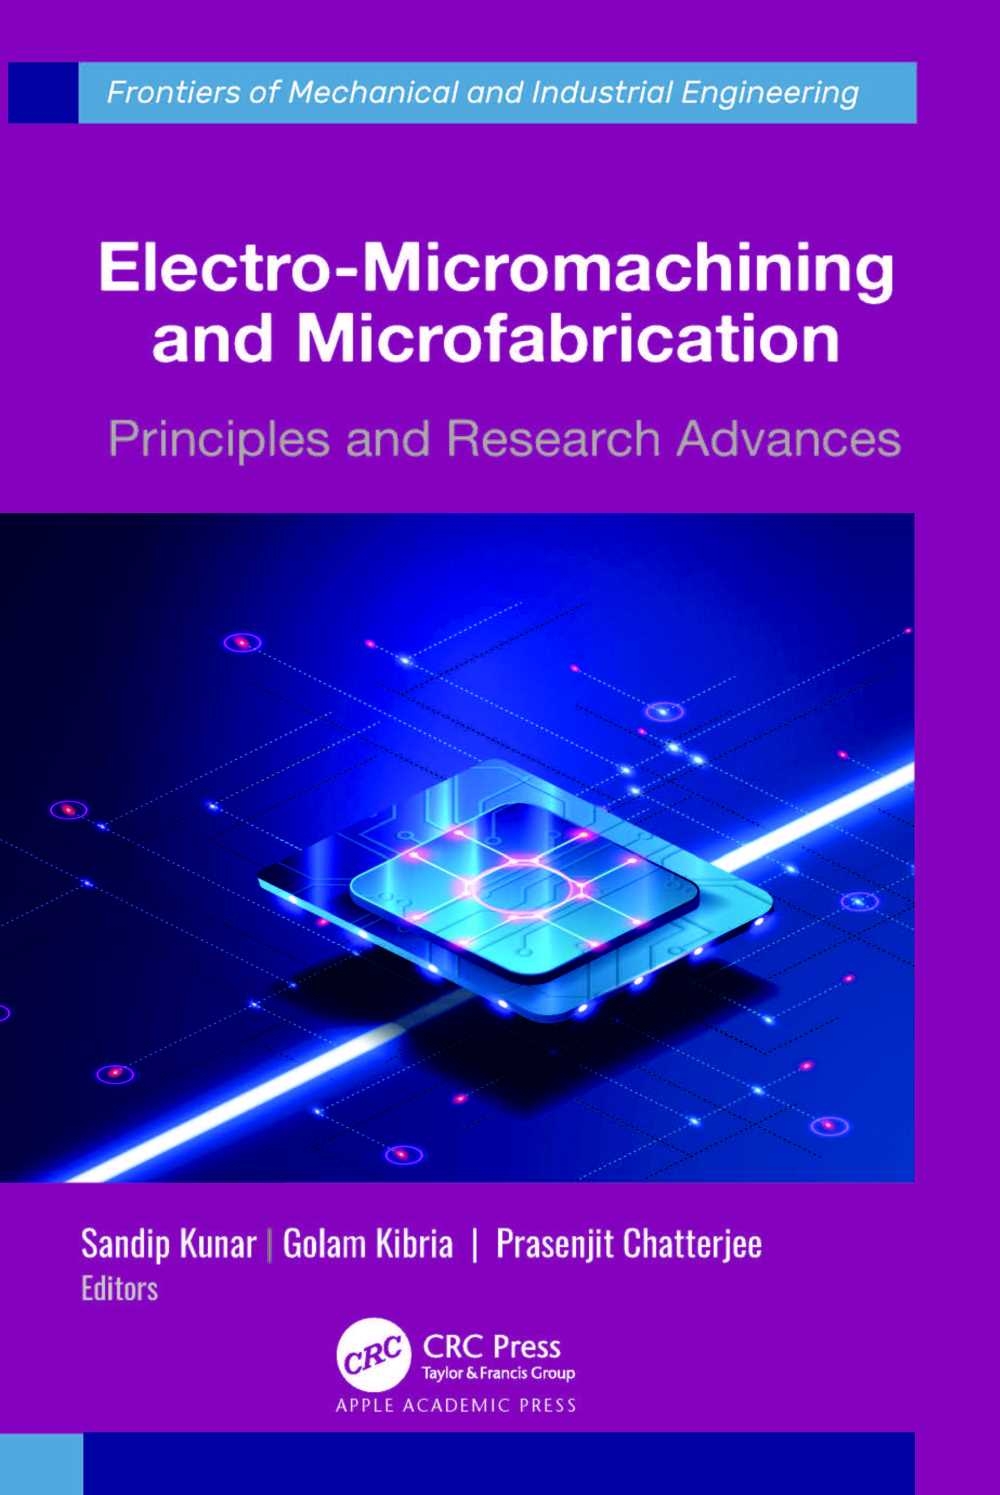 Electro-Micromachining and Microfabrication: Principles and Research Advances